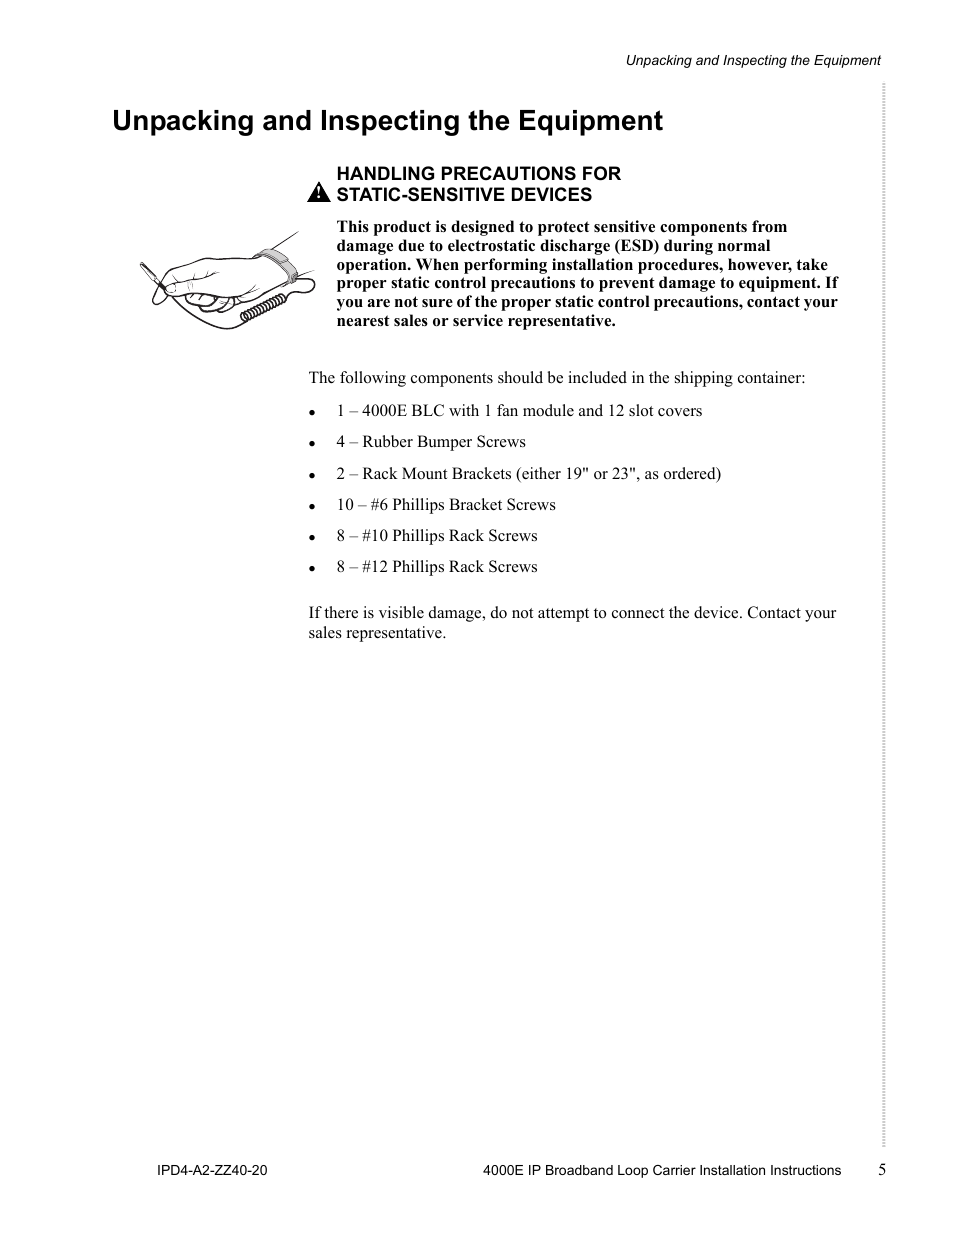 Unpacking and inspecting the equipment | Zhone Technologies 4000E User Manual | Page 5 / 22